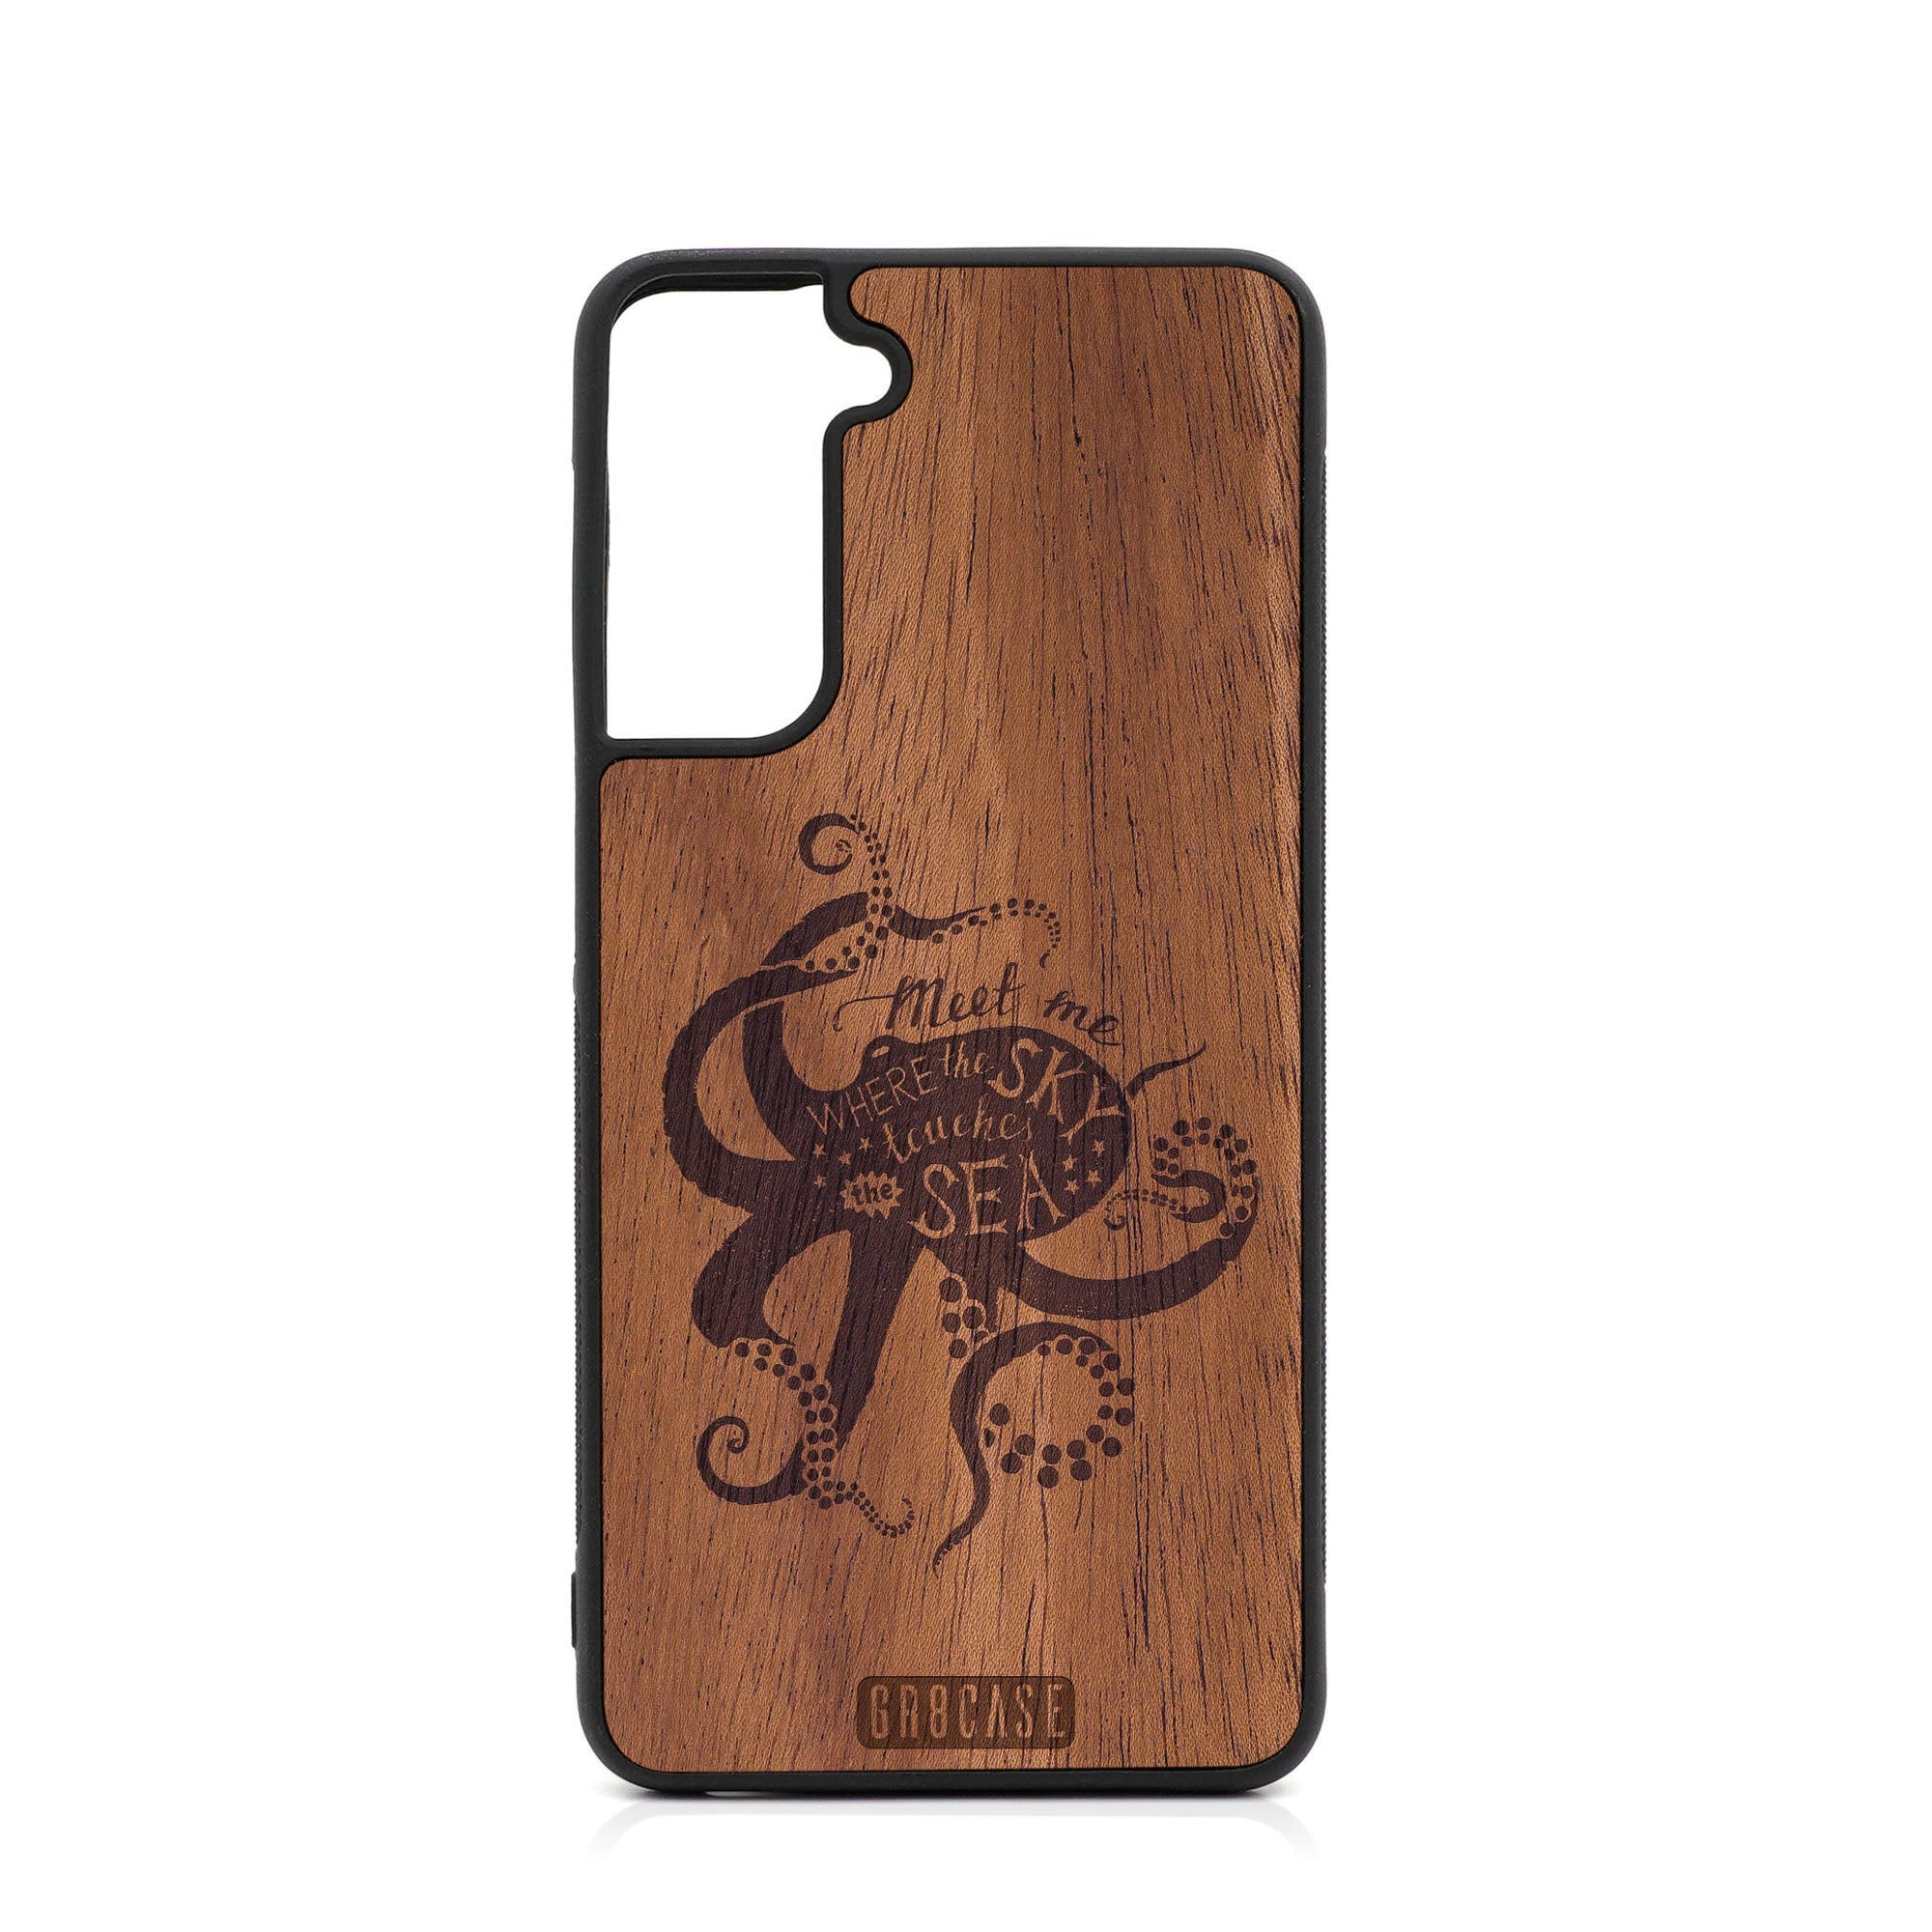 Meet Me Where The Sky Touches The Sea (Octopus) Design Wood Case For Samsung Galaxy S22 Plus